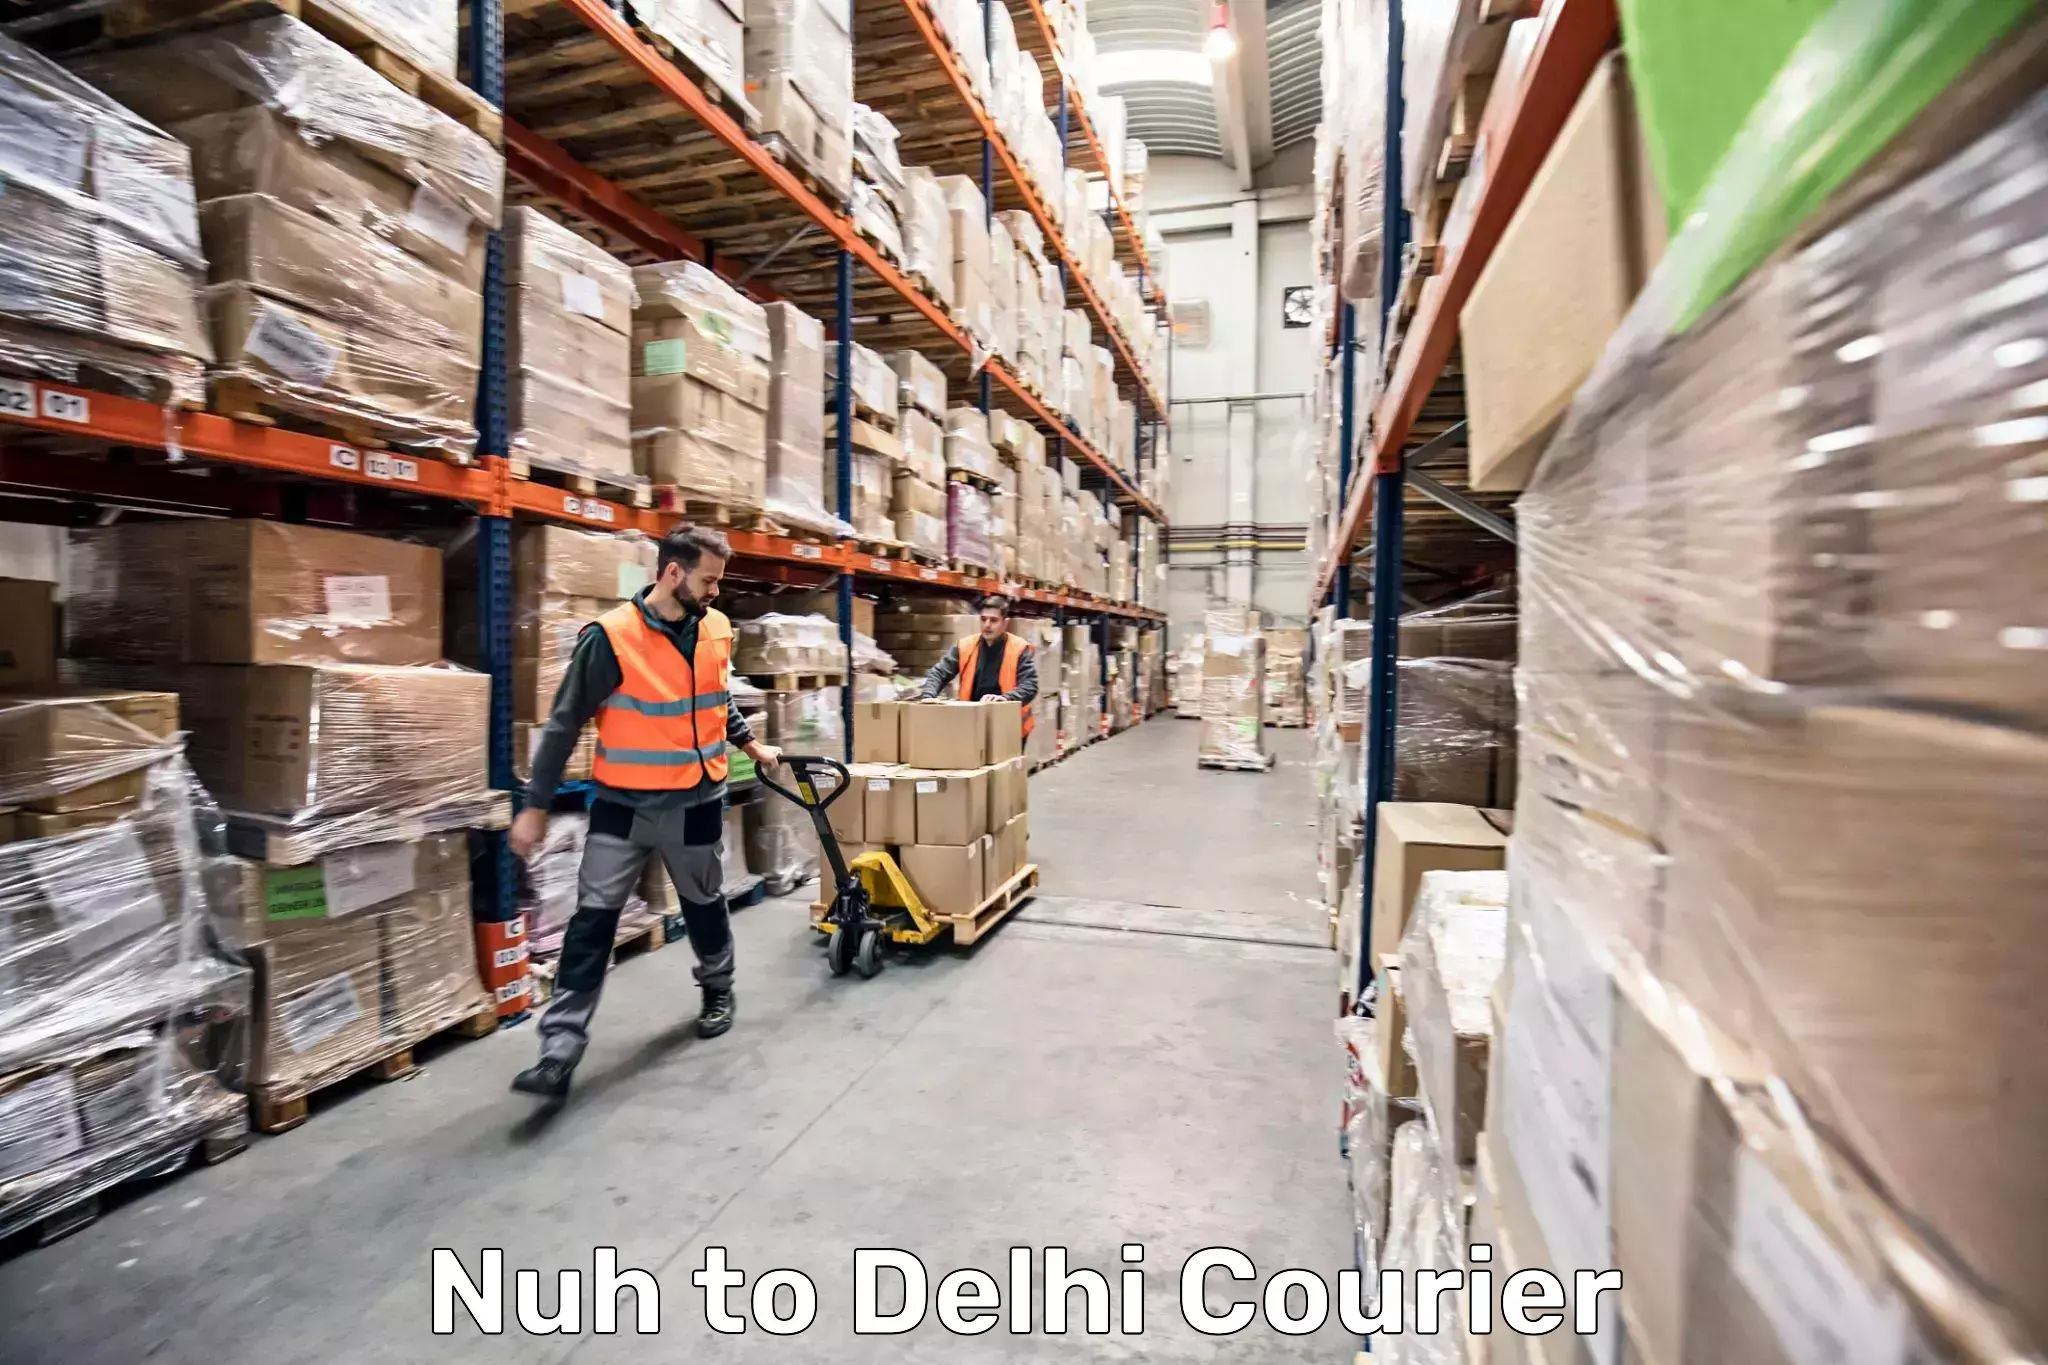 Luggage transport consultancy Nuh to East Delhi